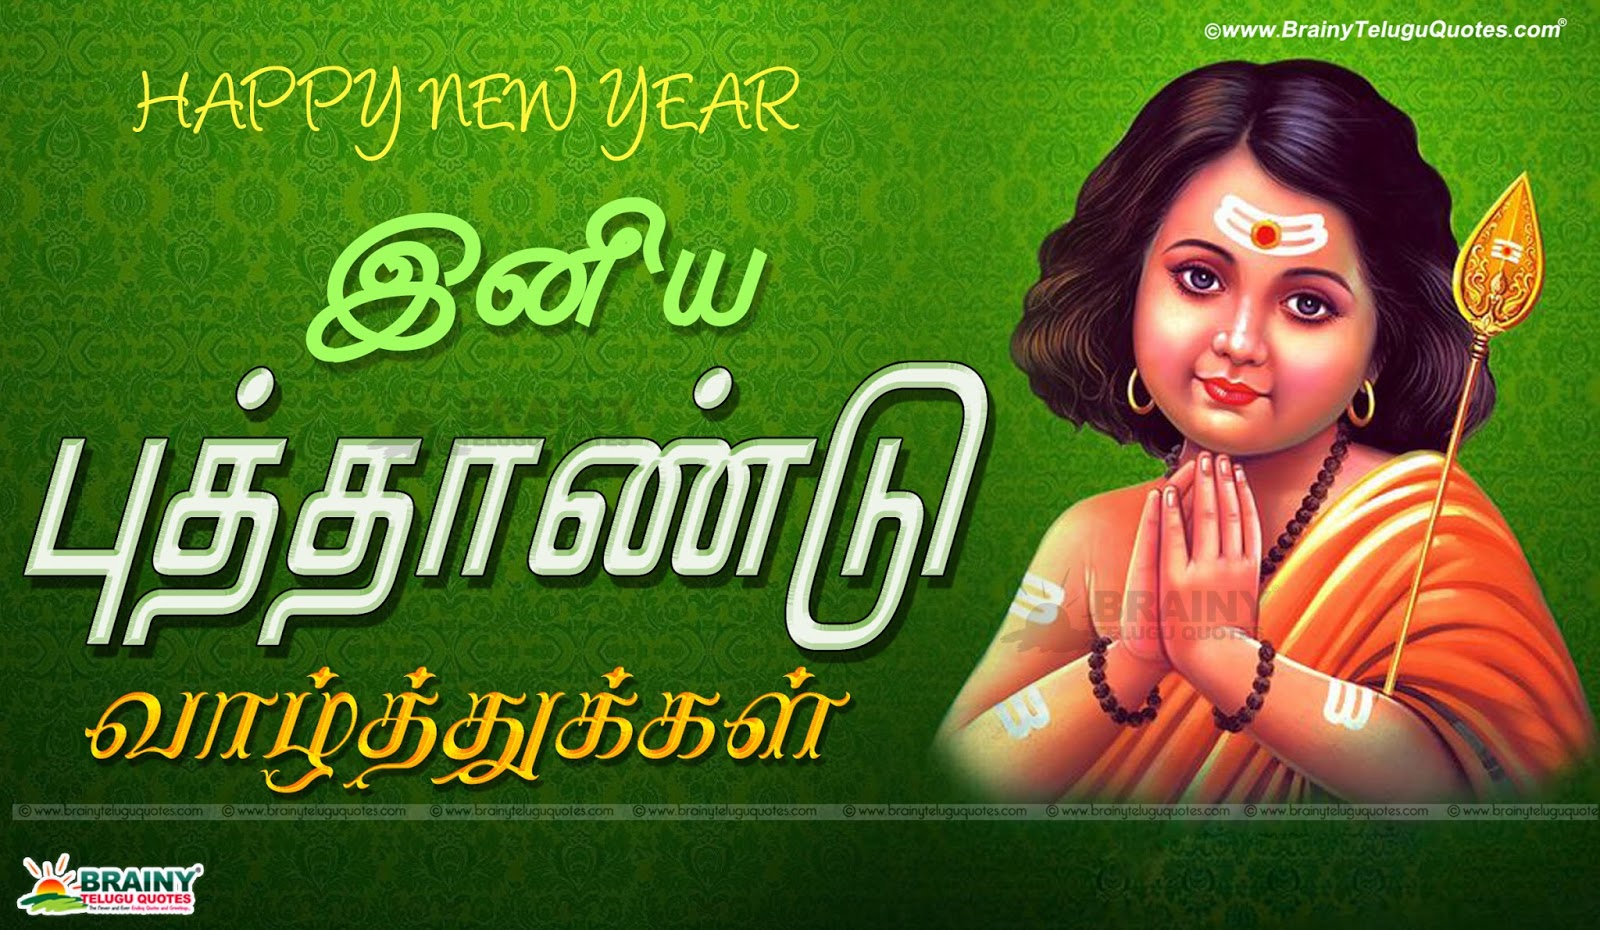 2017 New Year Tamil Greetings With Hd Wallpapers, Happy - Tamil New Year Lord Muruga - HD Wallpaper 